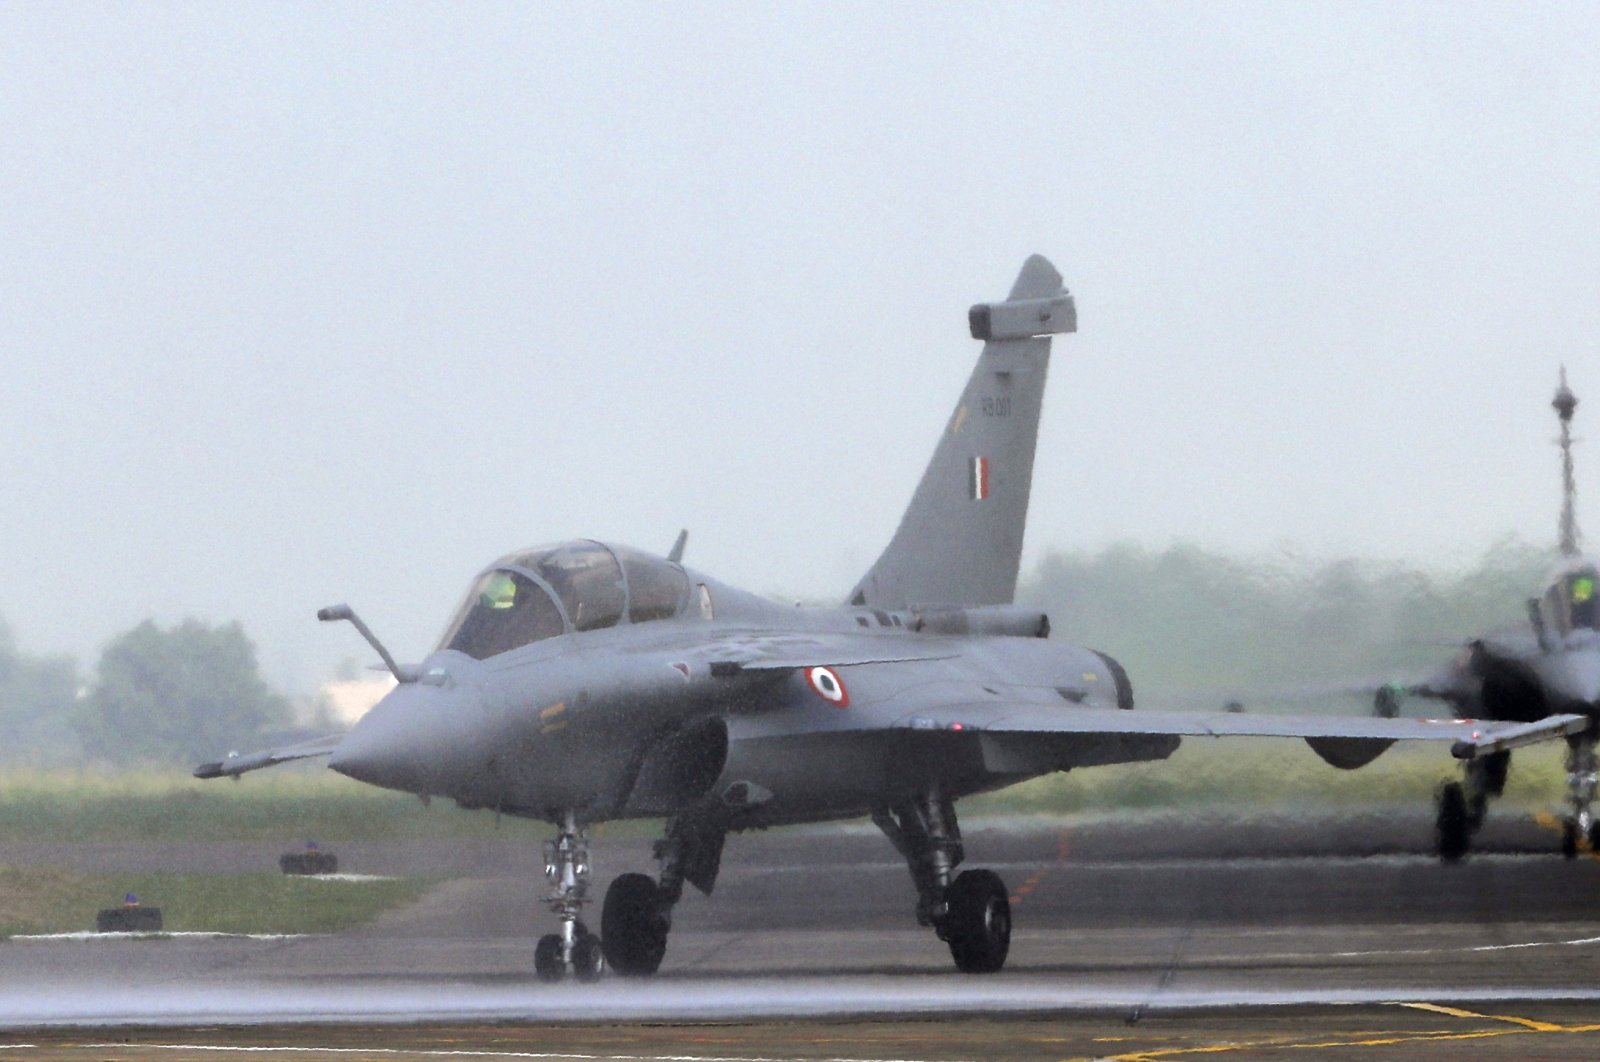 Water is sprayed on a French-made Rafale fighter jet during its induction ceremony at the Indian Air Force Station in Ambala, India, Sept.10, 2020. (AP Photo)